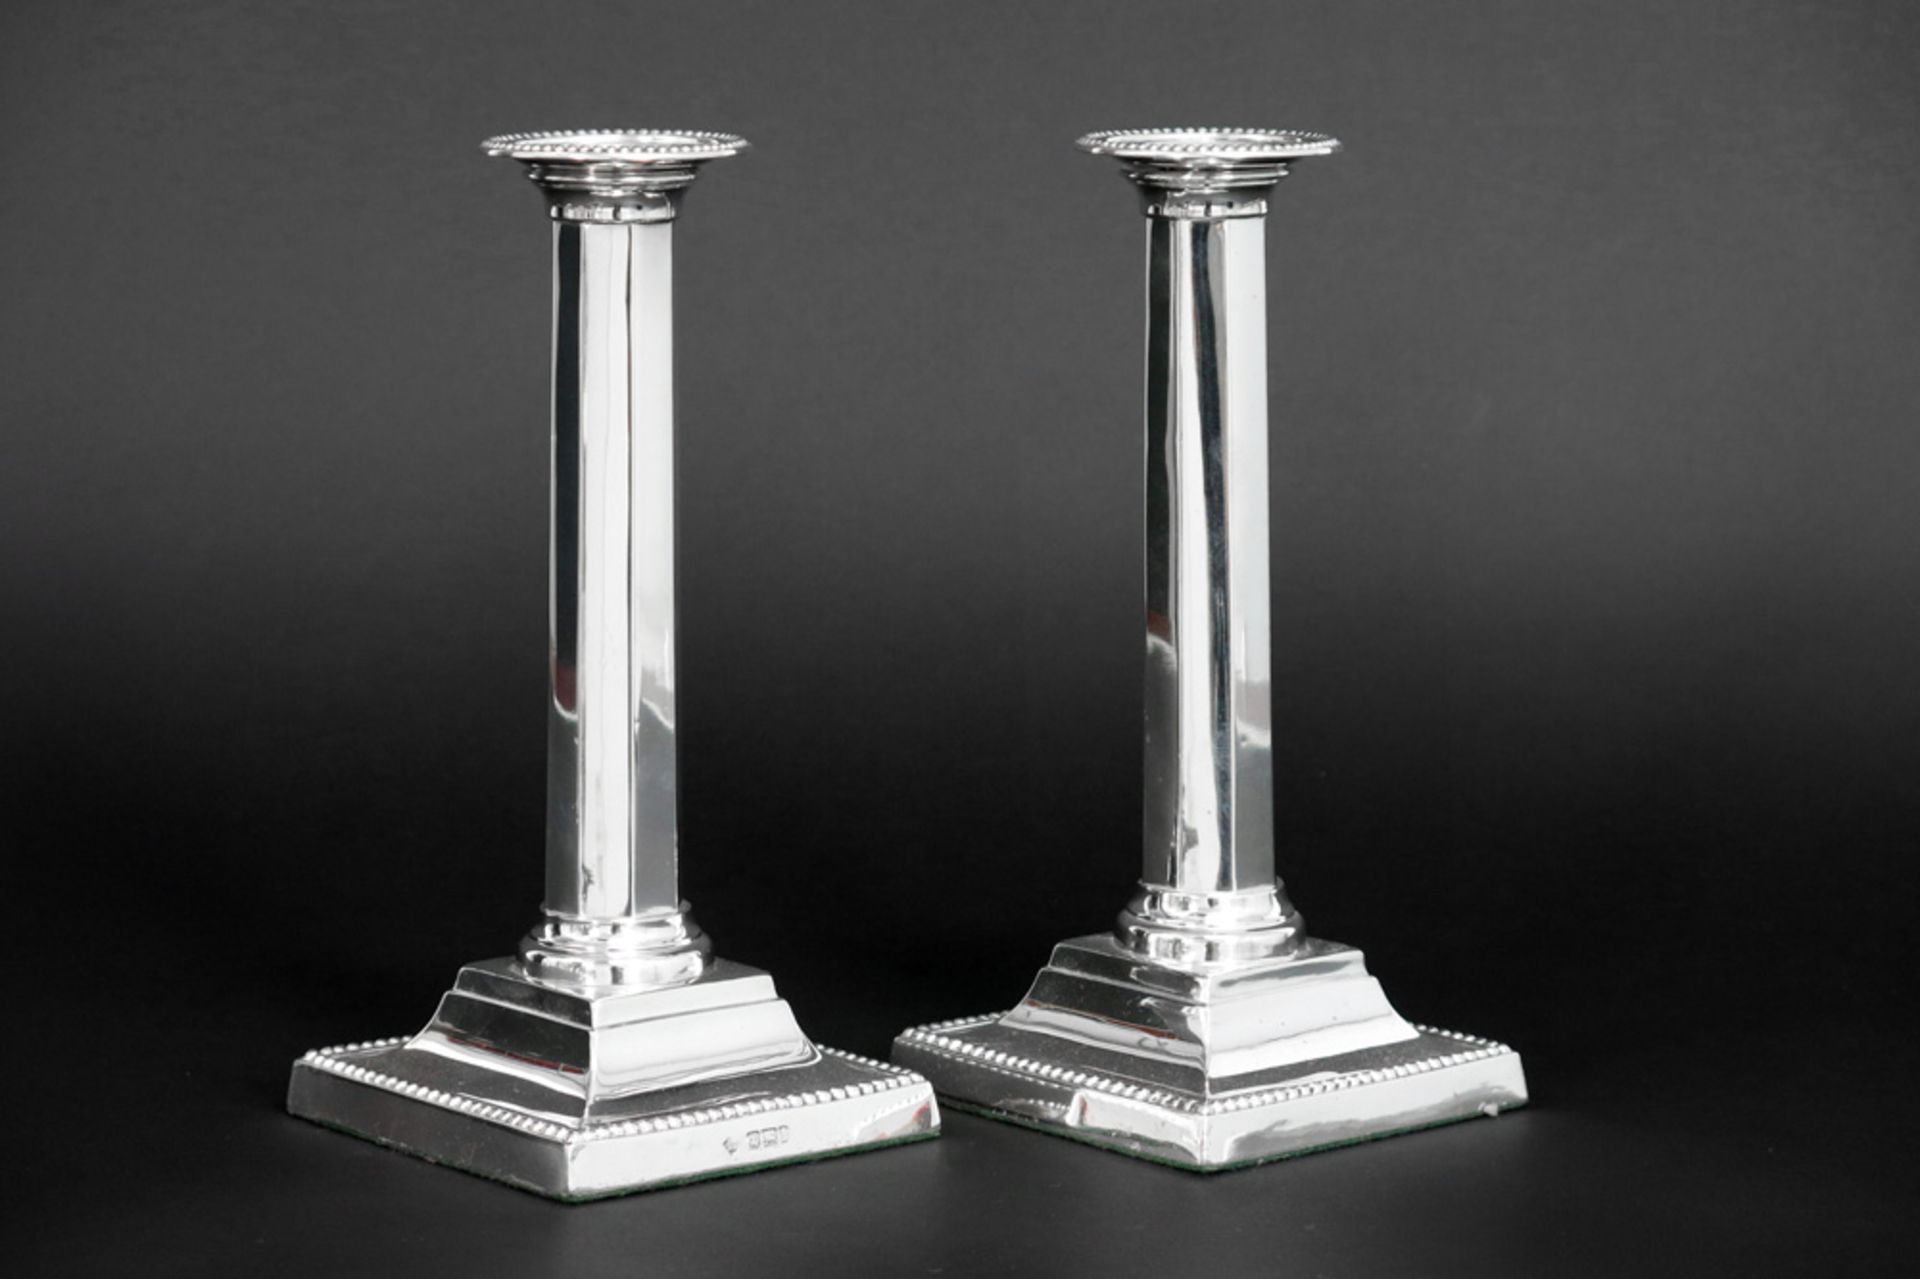 pair of antique candlesticks in marked and "Martin & Hall" signed silver ||MARTIN & HALL mooi paar